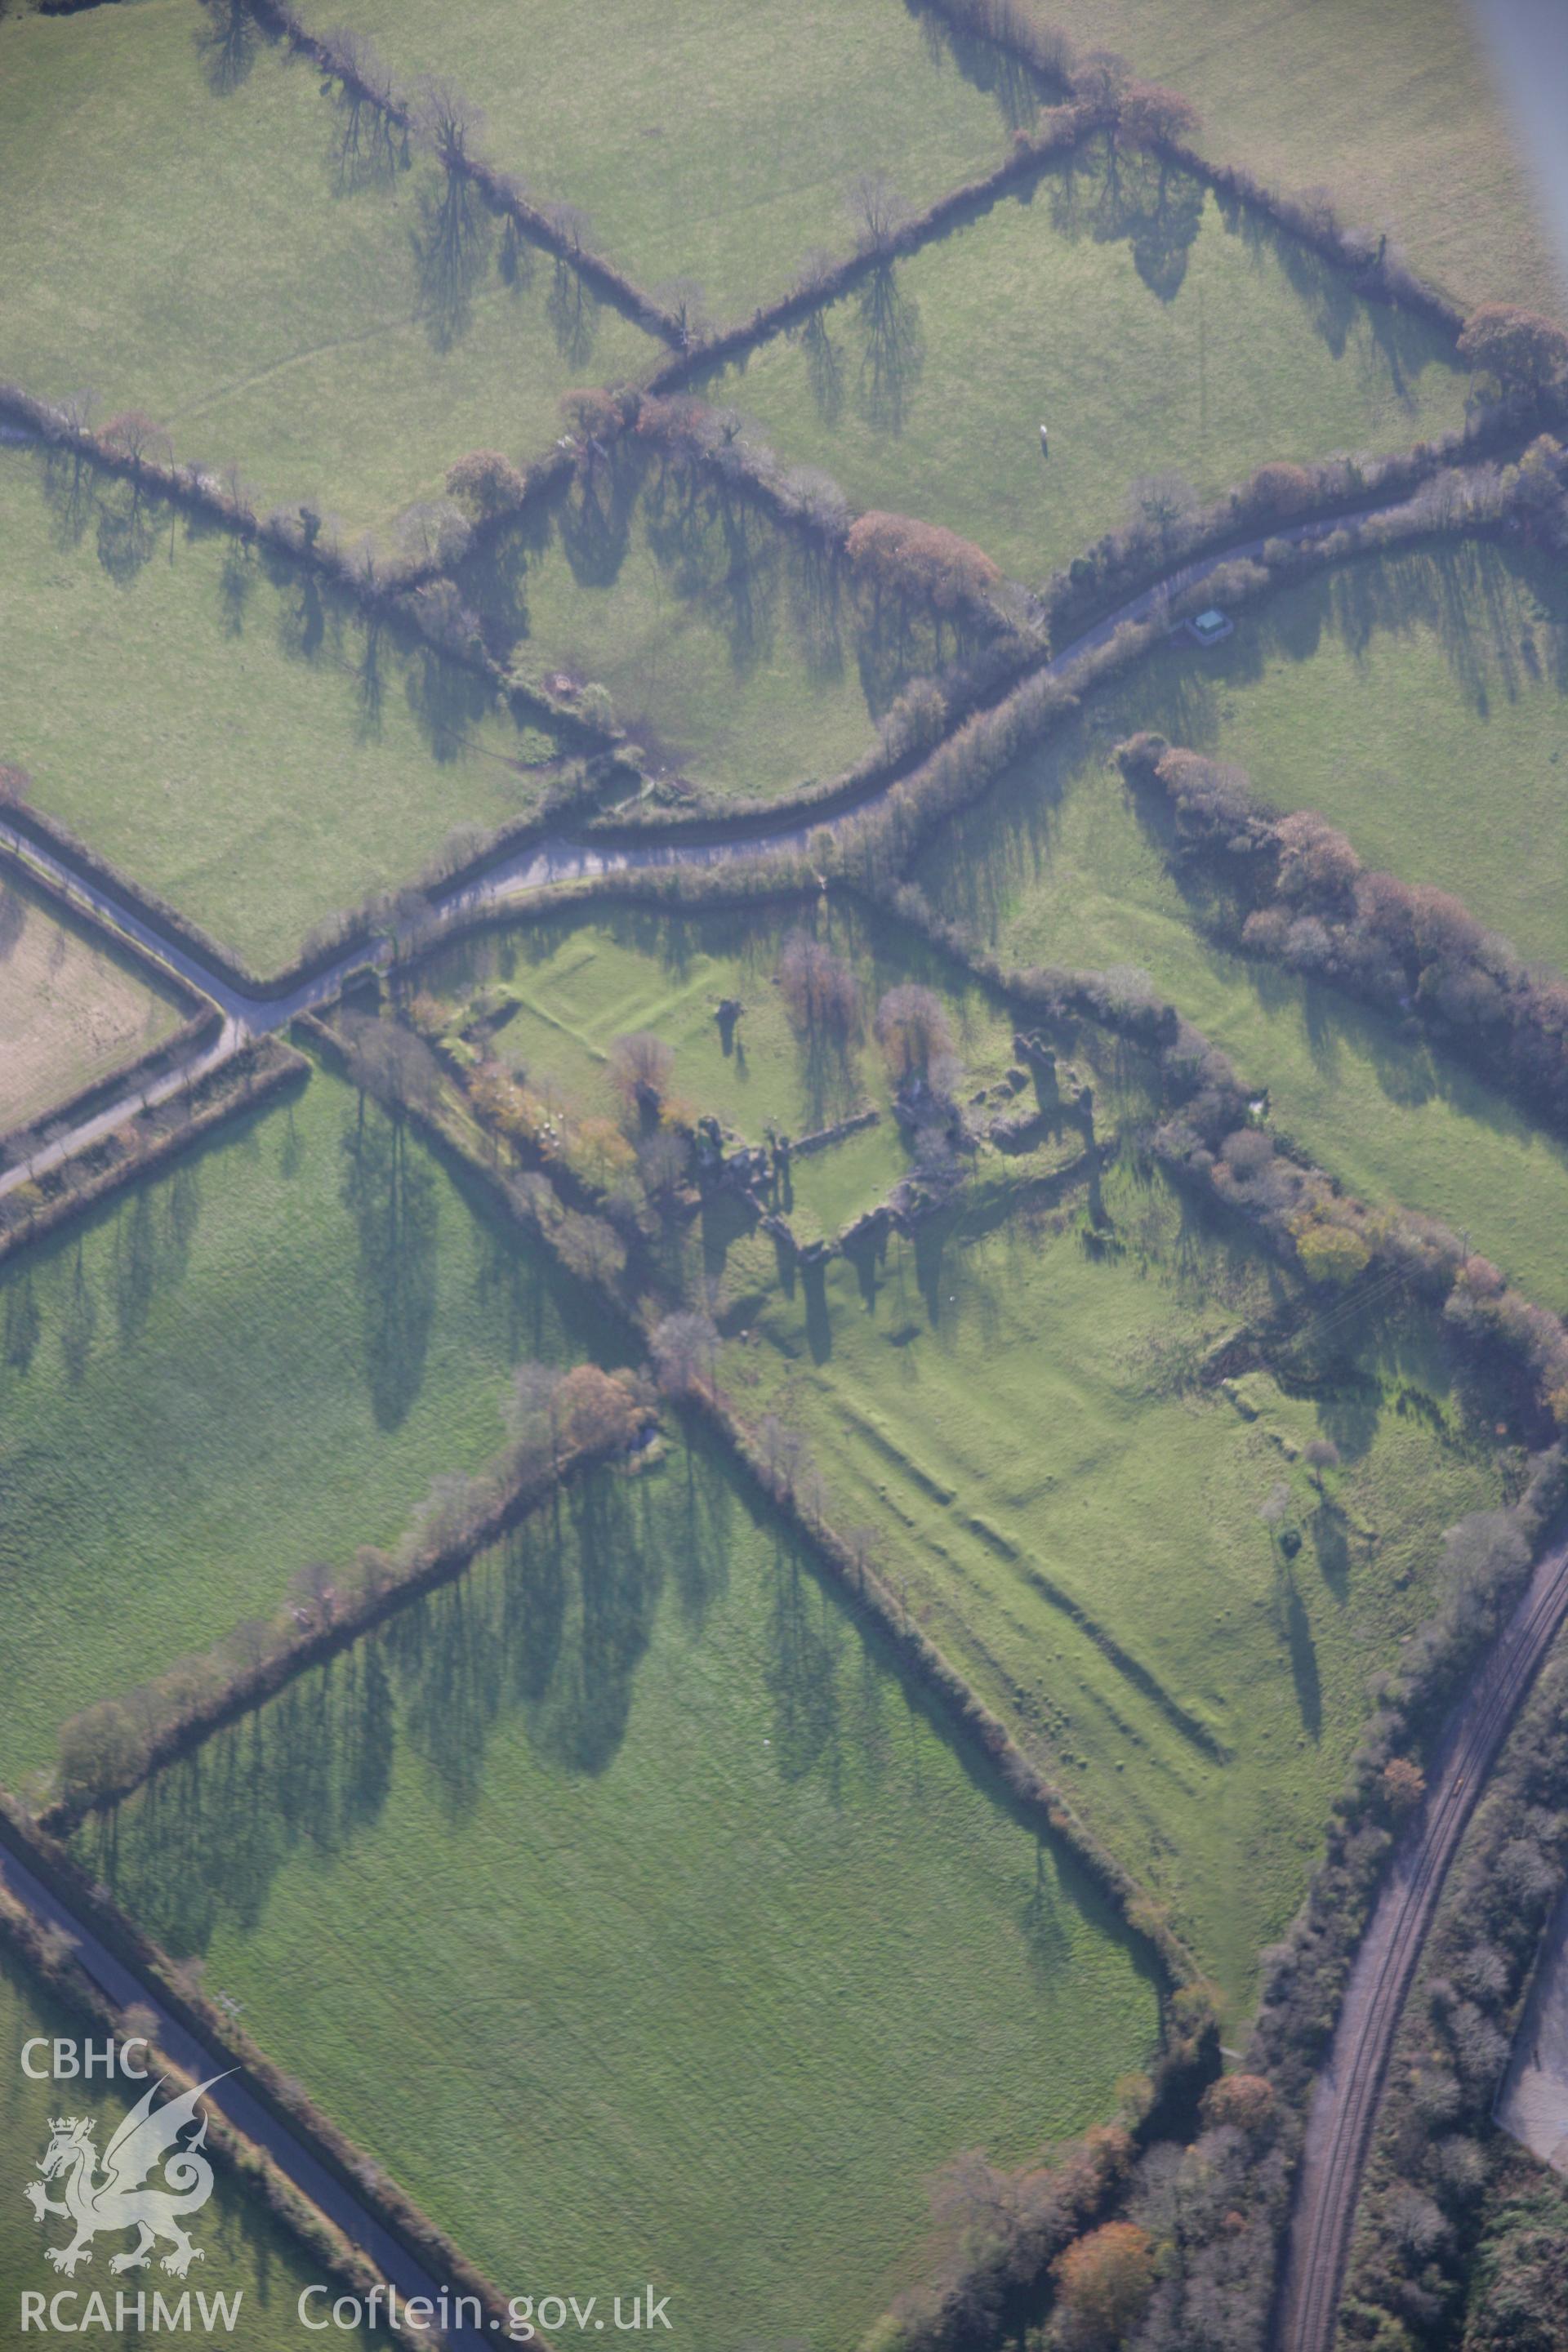 RCAHMW colour oblique aerial photograph of Haroldston House Garden Earthworks, Haverfordwest, in winter with low light looking south. Taken on 19 November 2005 by Toby Driver